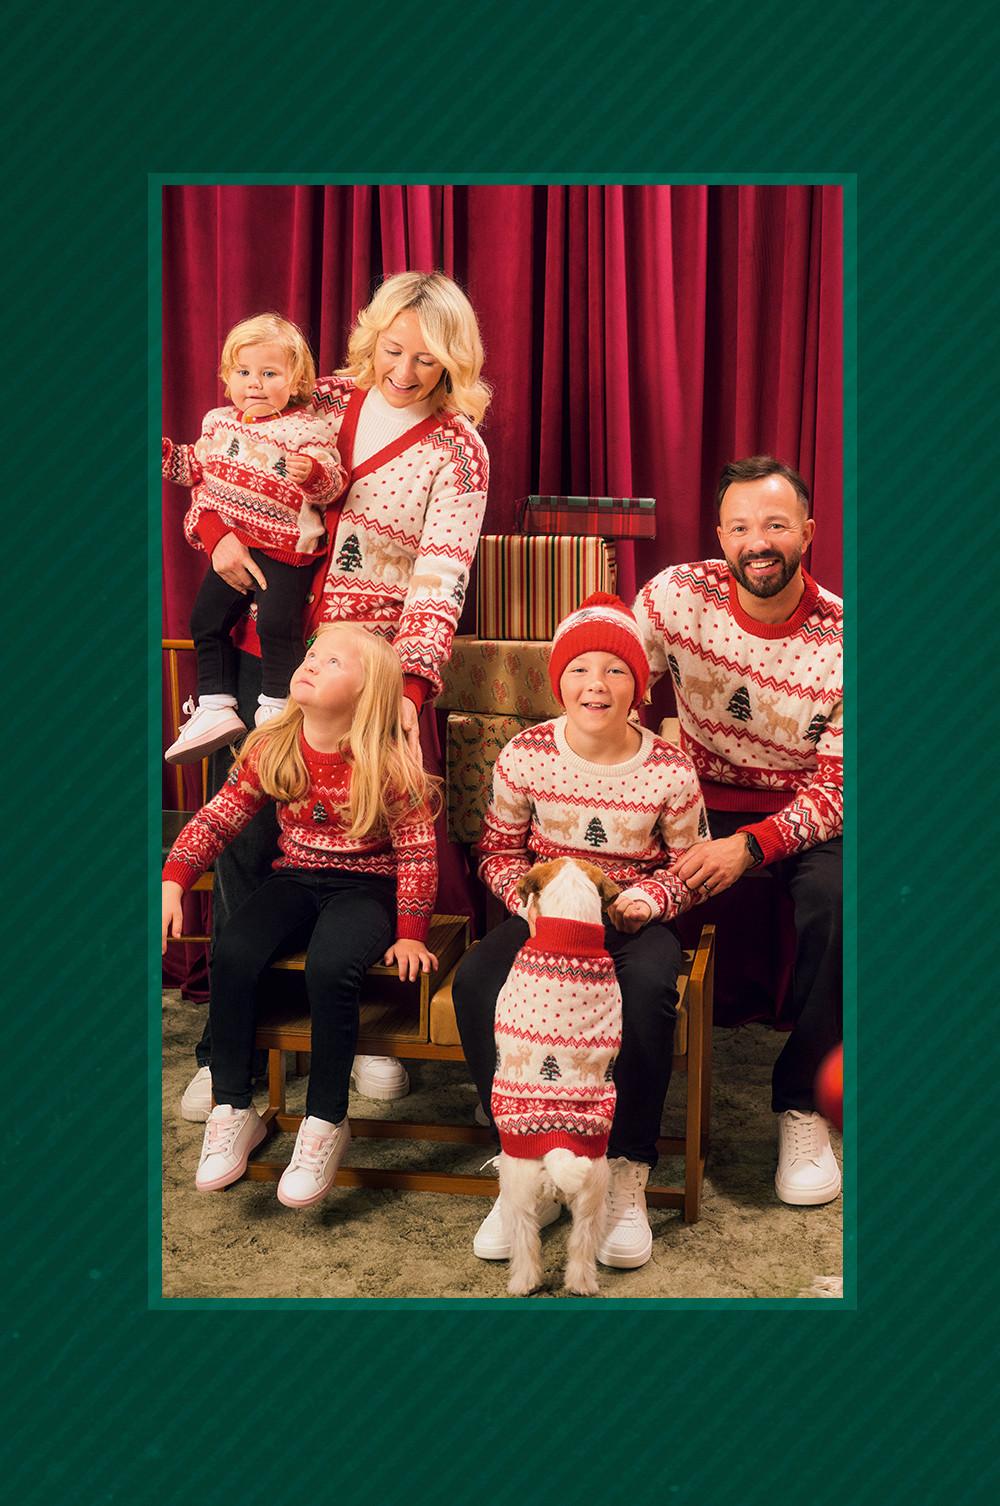 Matching patterned Christmas jumper